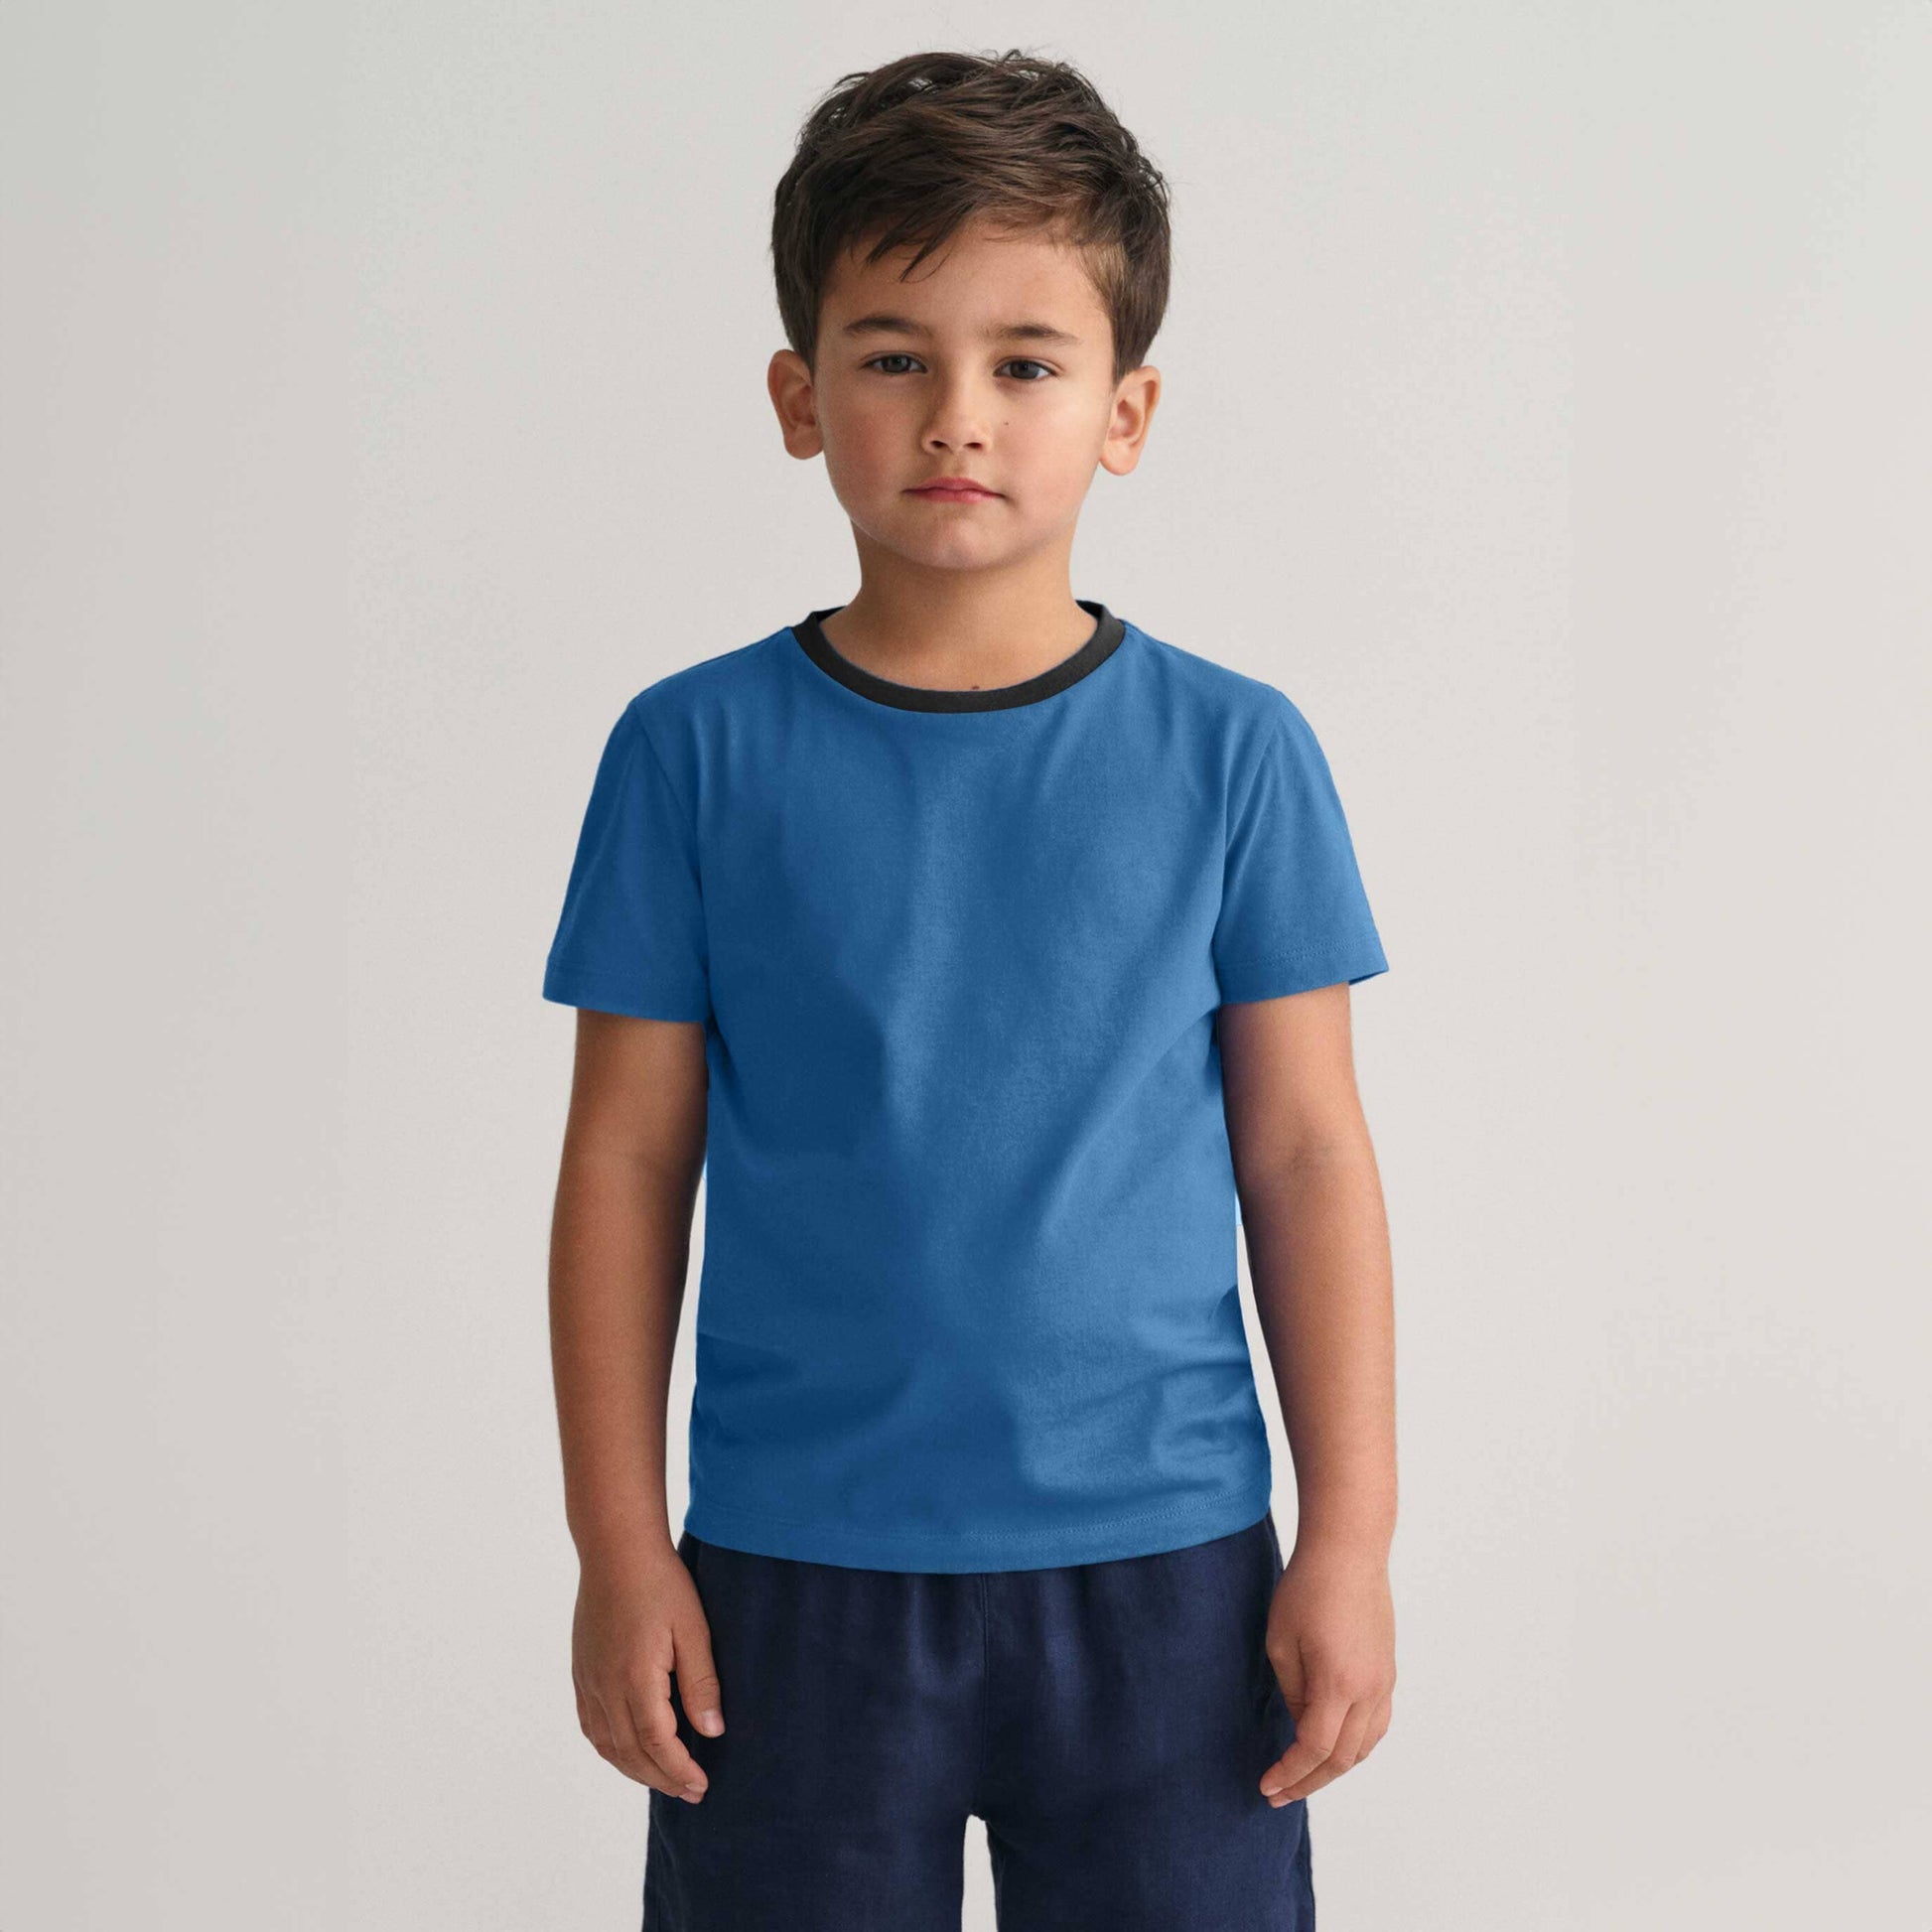 Polo Republica Kid's Contrast Neck Minor Fault Tee Shirt Kid's Tee Shirt Polo Republica Teal Blue 3-4 Years 